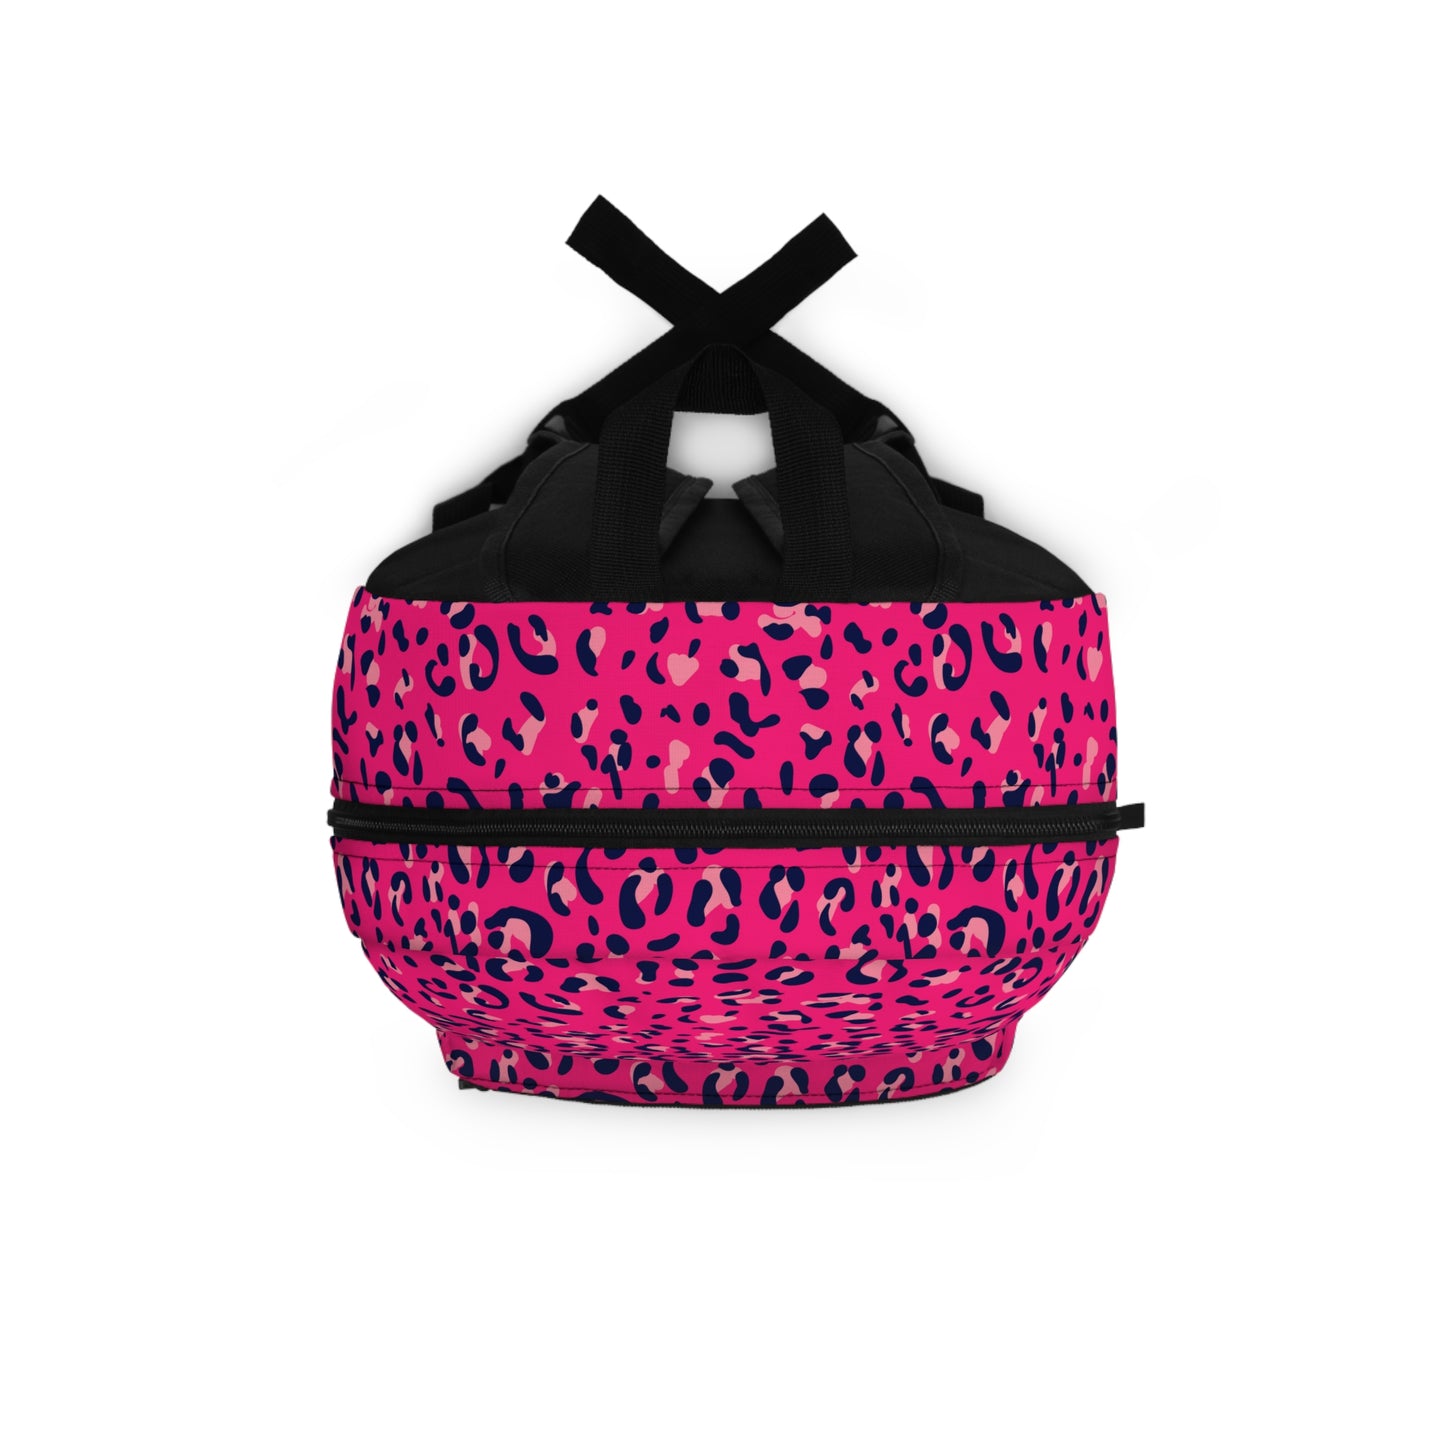 Pink Leopard Print Backpack / Personalized Backpack